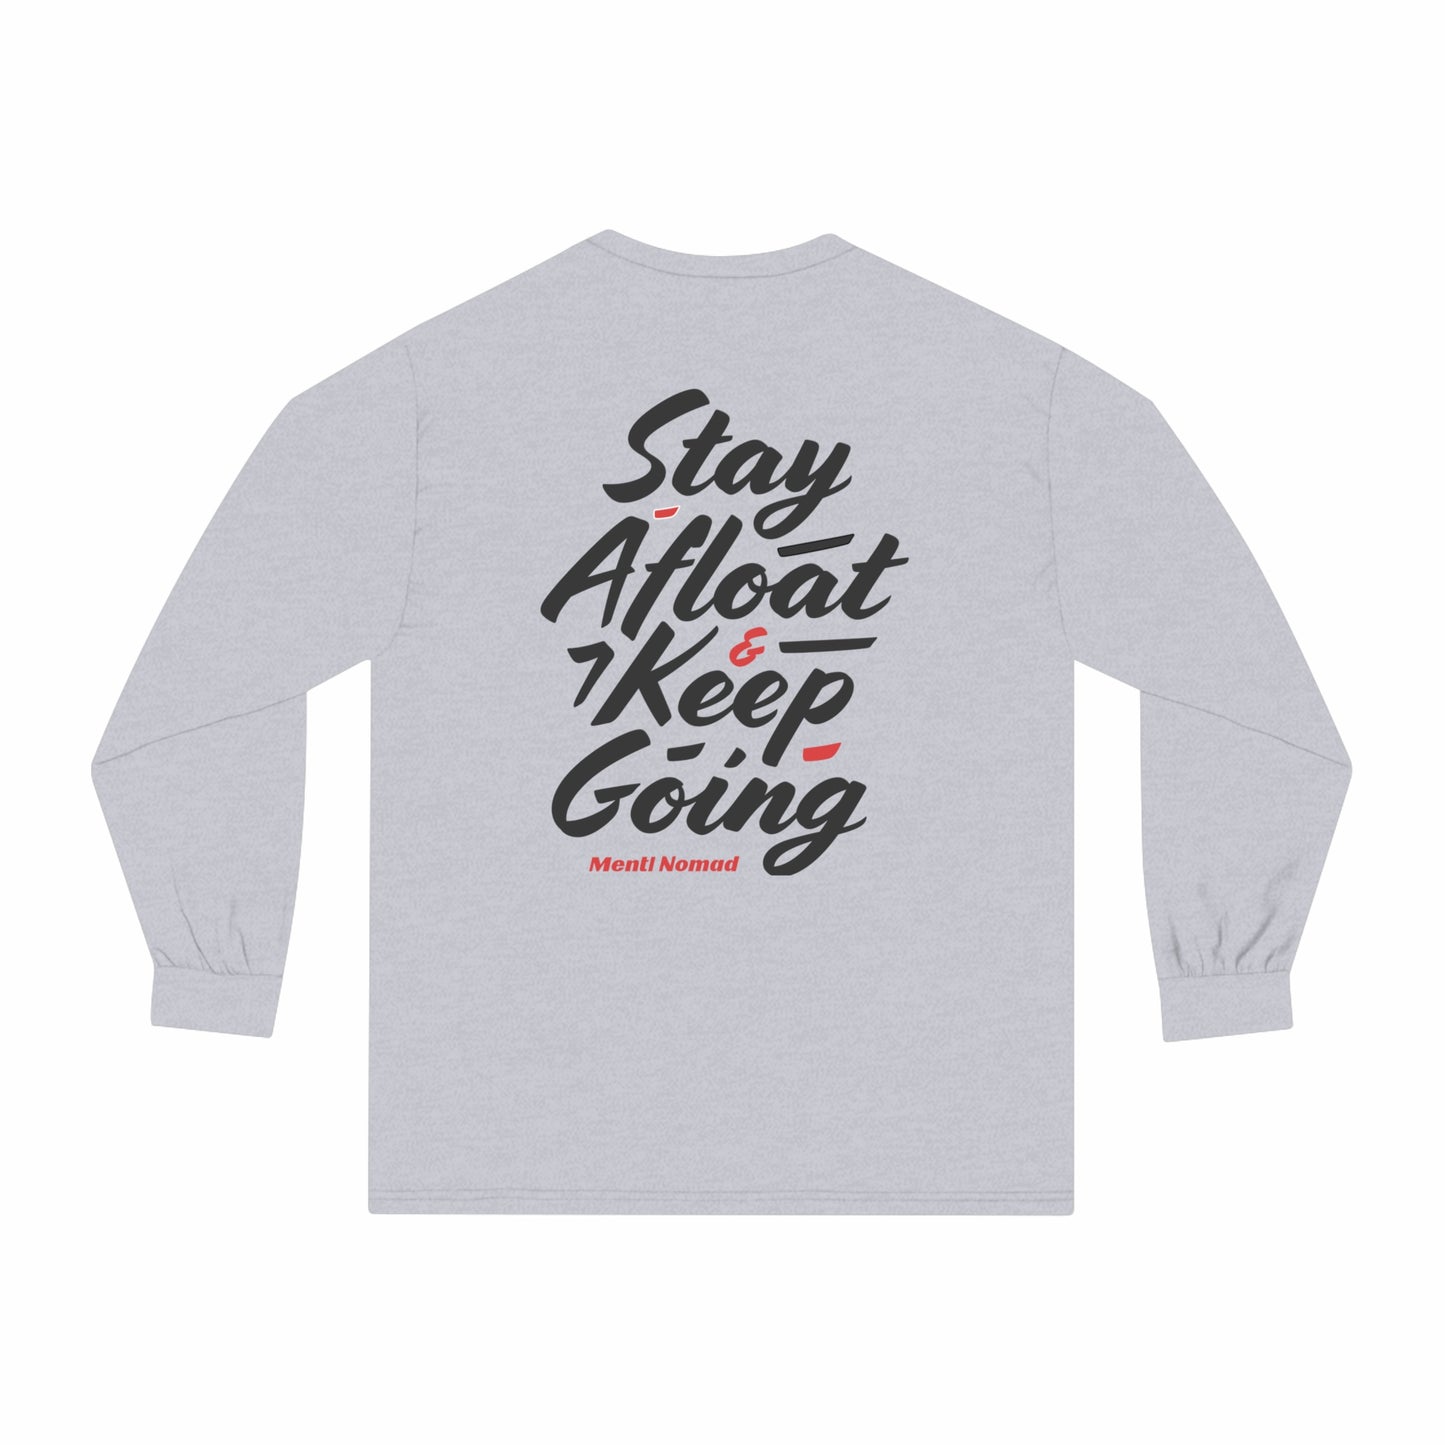 Stay Afloat & Keep Going Long Sleeve